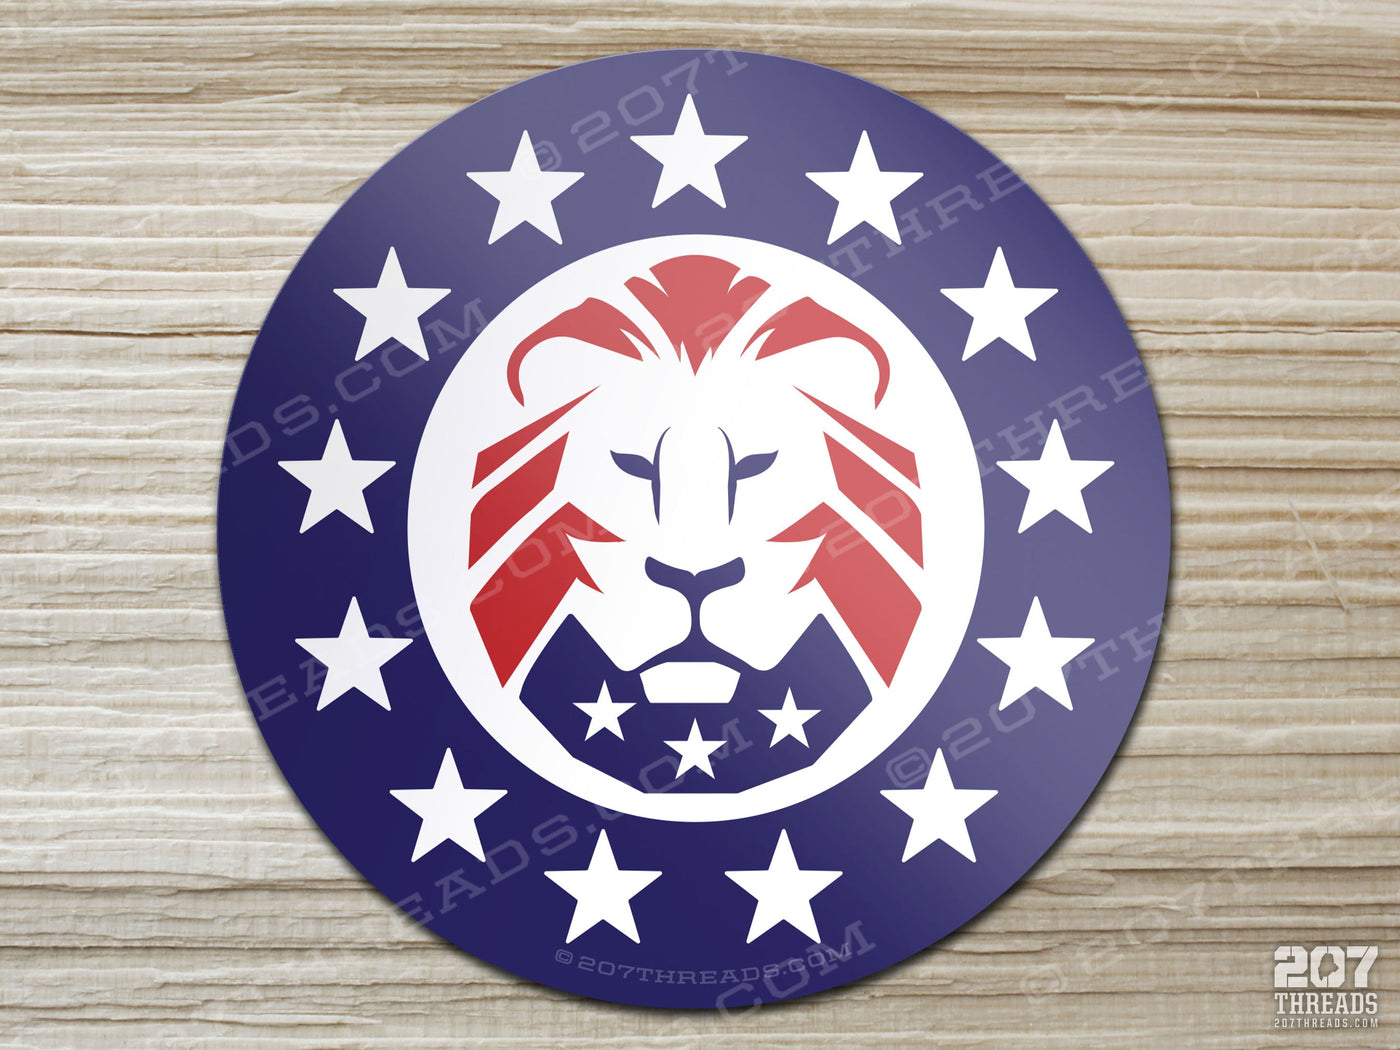 MAGA Trump 2024 Lion Sticker, 13 Stars American Patriotic Decal, Make America Great Again Constitution We The People Forever USA Patriot